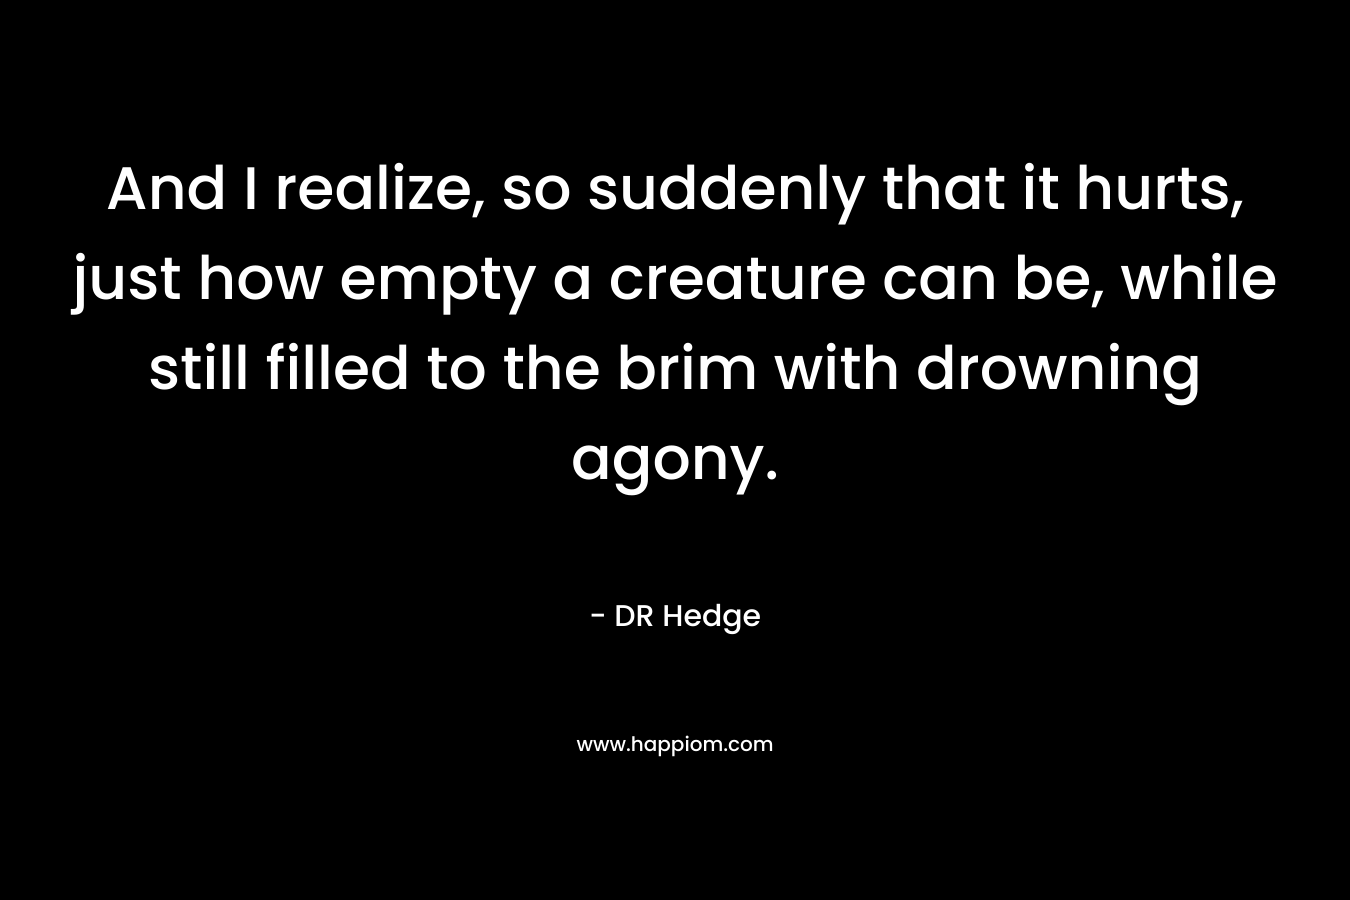 And I realize, so suddenly that it hurts, just how empty a creature can be, while still filled to the brim with drowning agony.